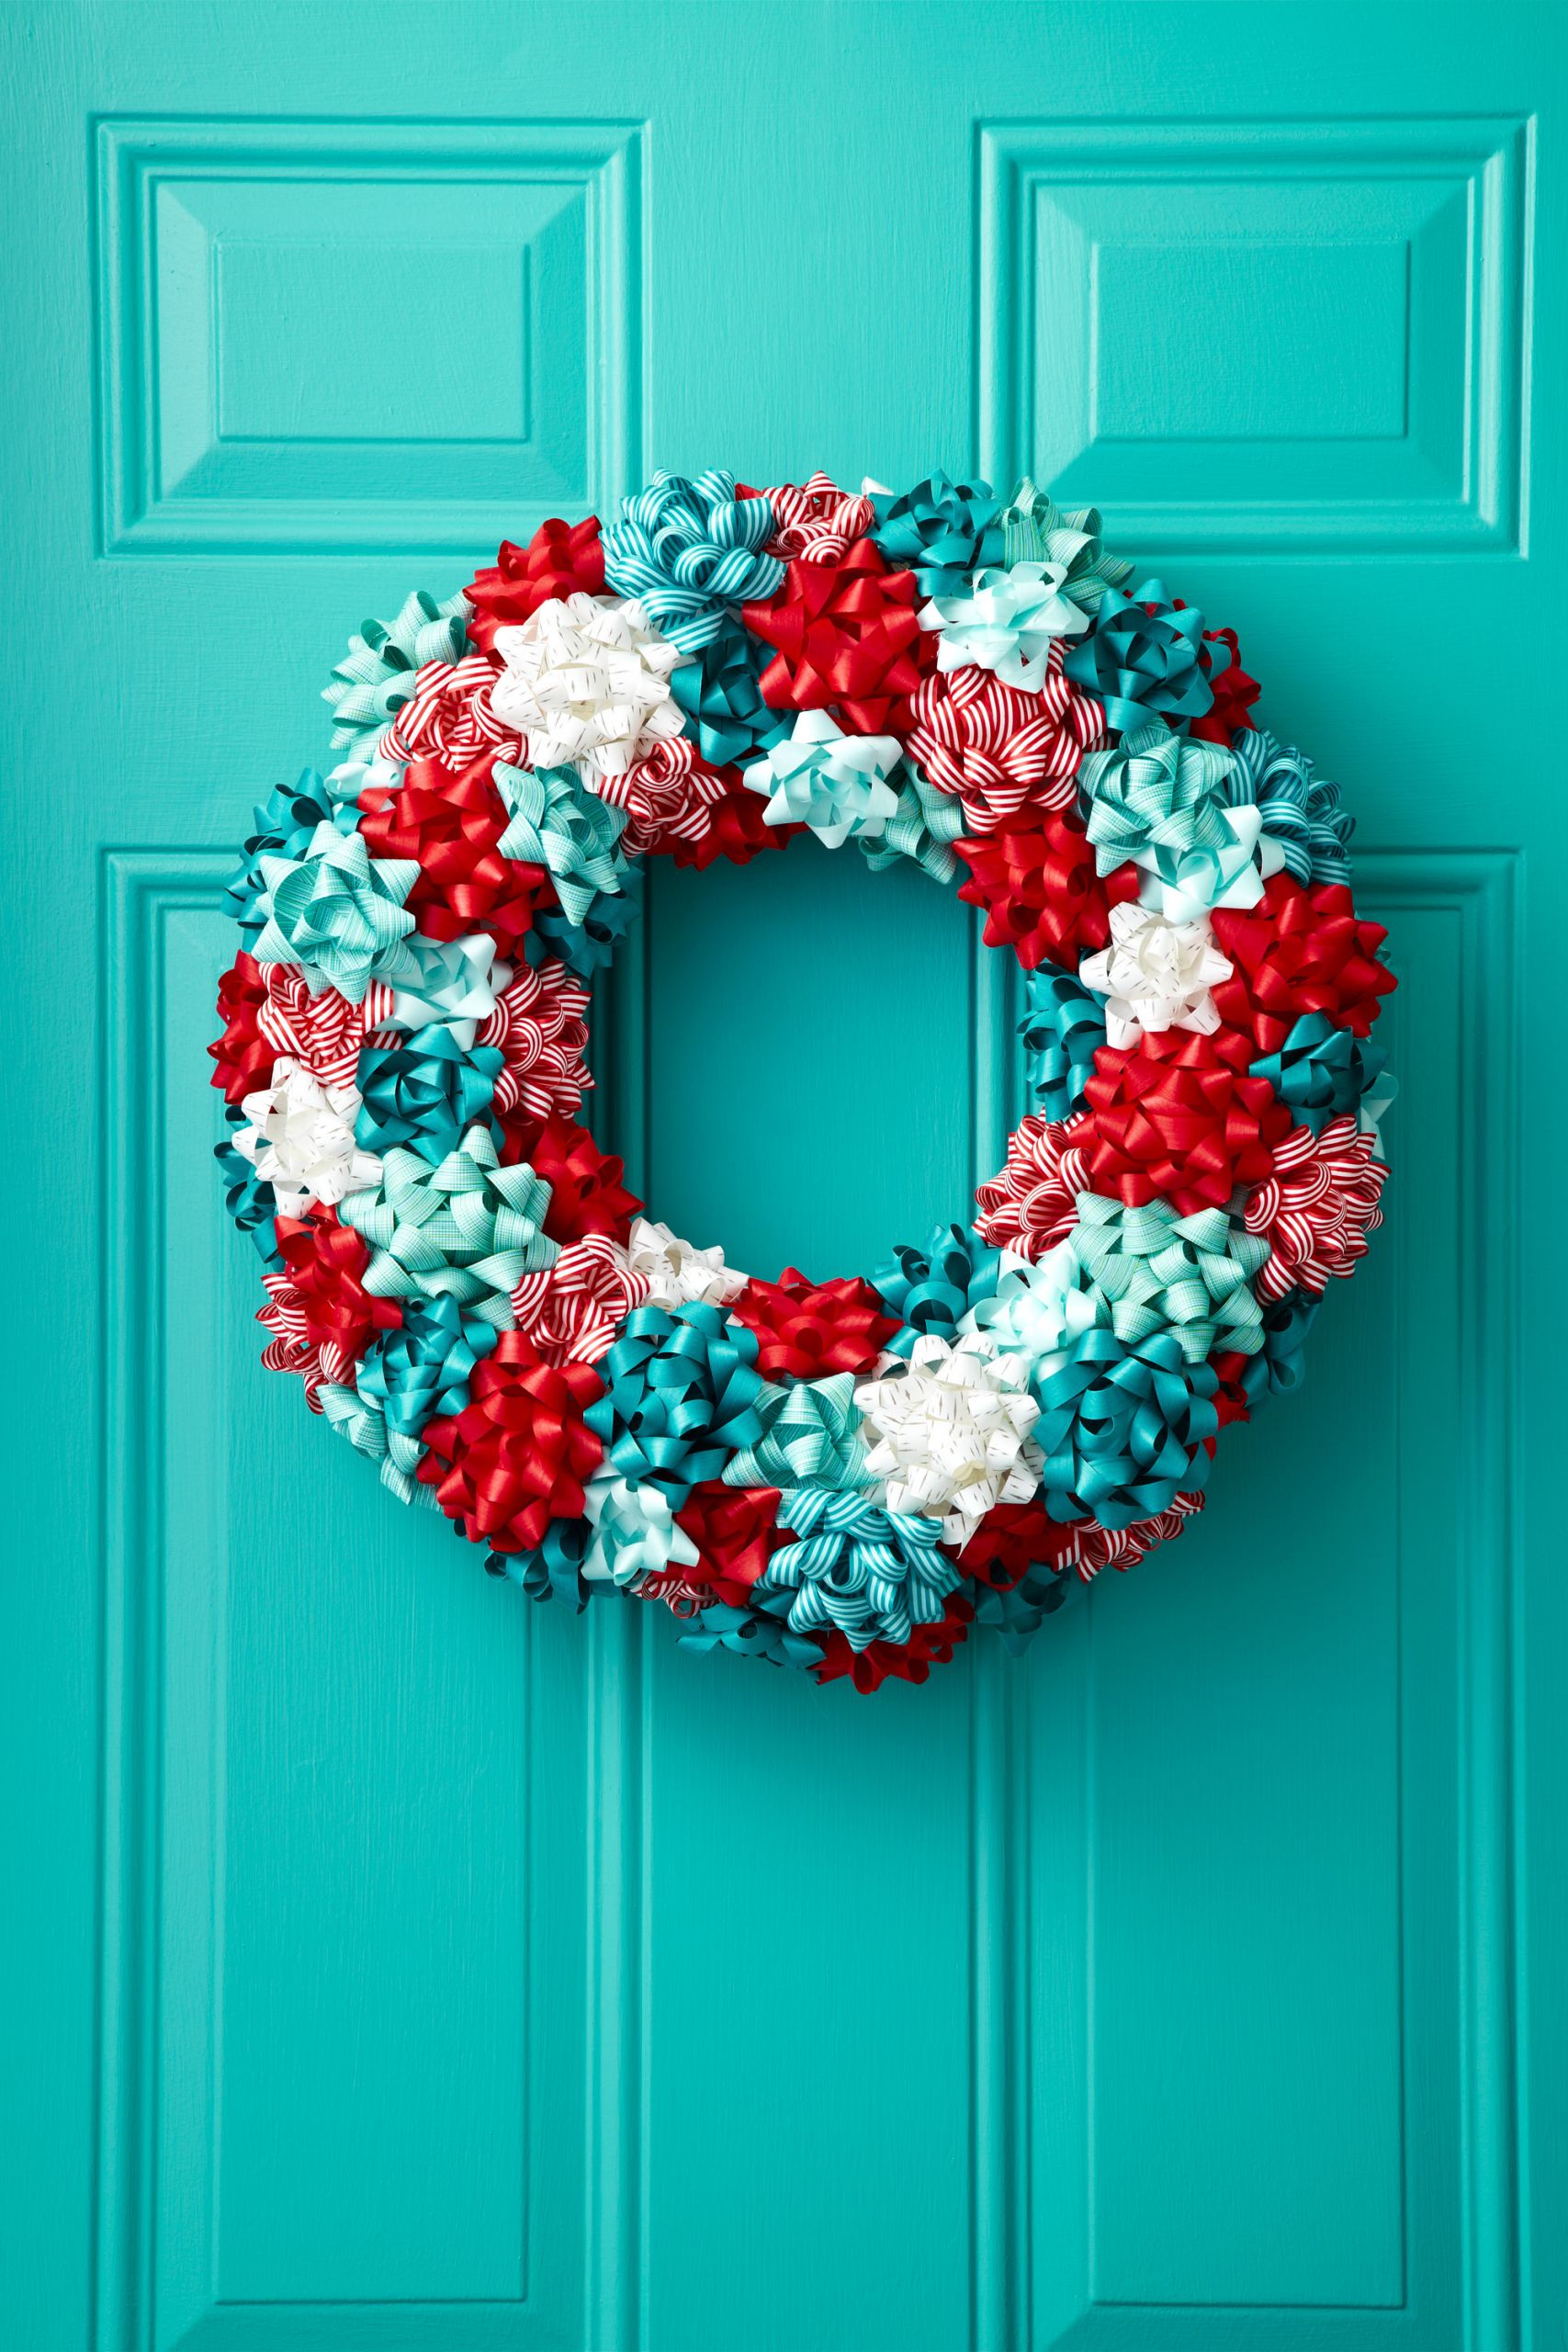 DIY Holiday Decorations
 39 Easy DIY Christmas Decorations Homemade Ideas for